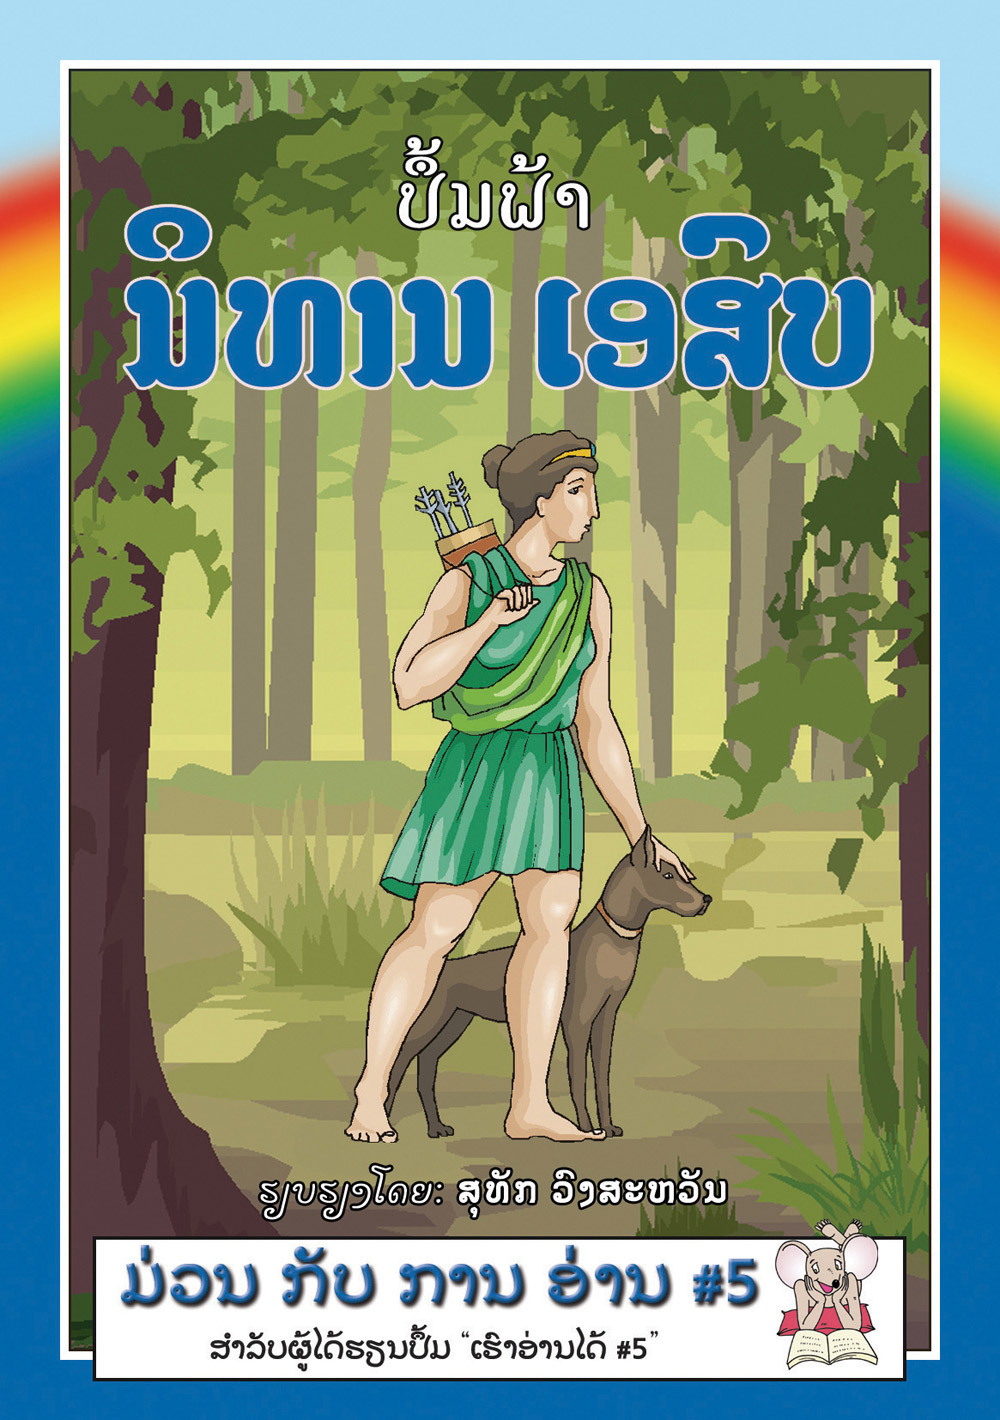 The Blue book of Aesop's Fables large book cover, published in Lao language